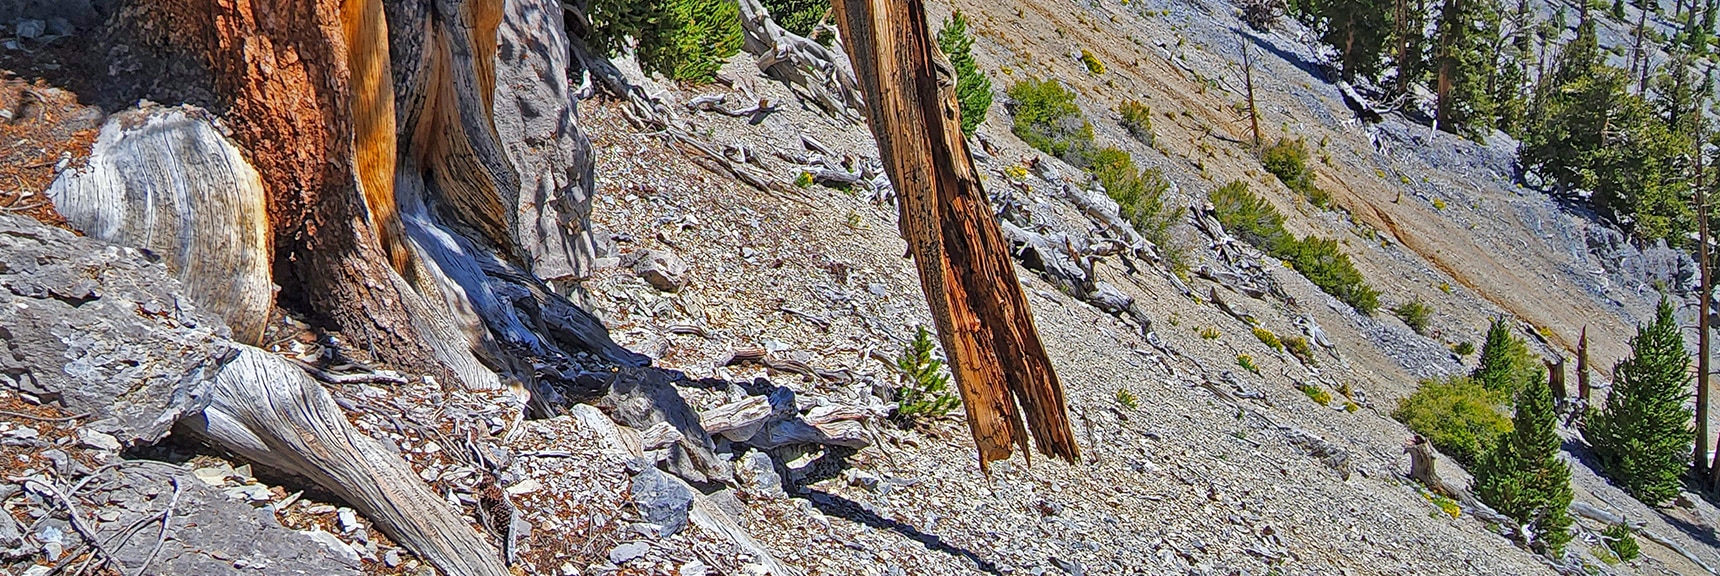 Entire Tree Trunk Suspended Upside-down in Air. Traditional Avalanche Slope Approach Seen Beyond | Mummy Mountain Grand Crossing | Lee Canyon to Deer Creek Road | Mt Charleston Wilderness | Spring Mountains, Nevada |